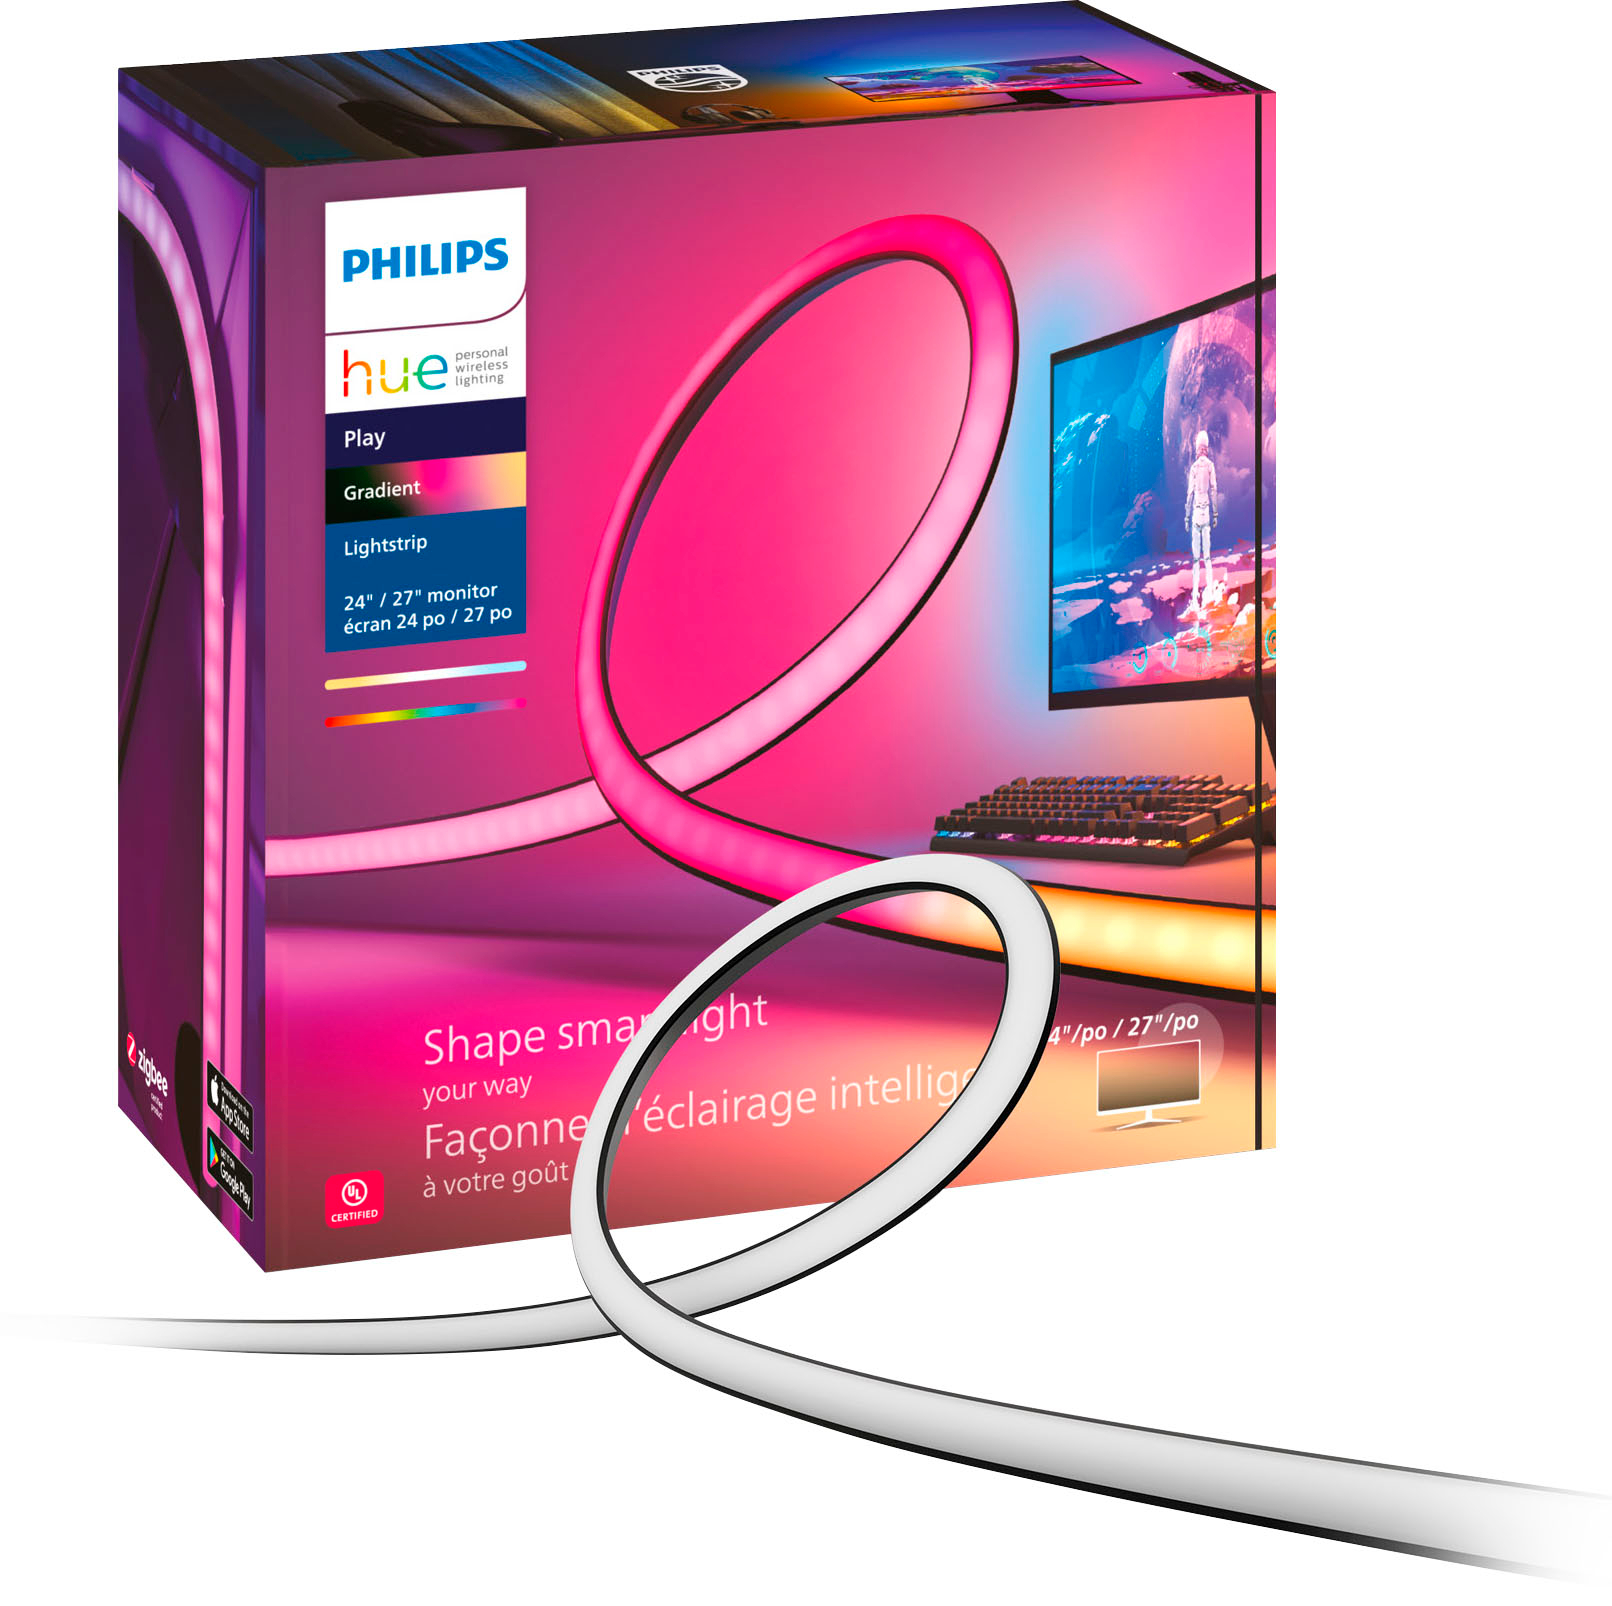 Philips Hue Play Gradient Lightstrip for 24 to 27 PC White 578294 - Best  Buy